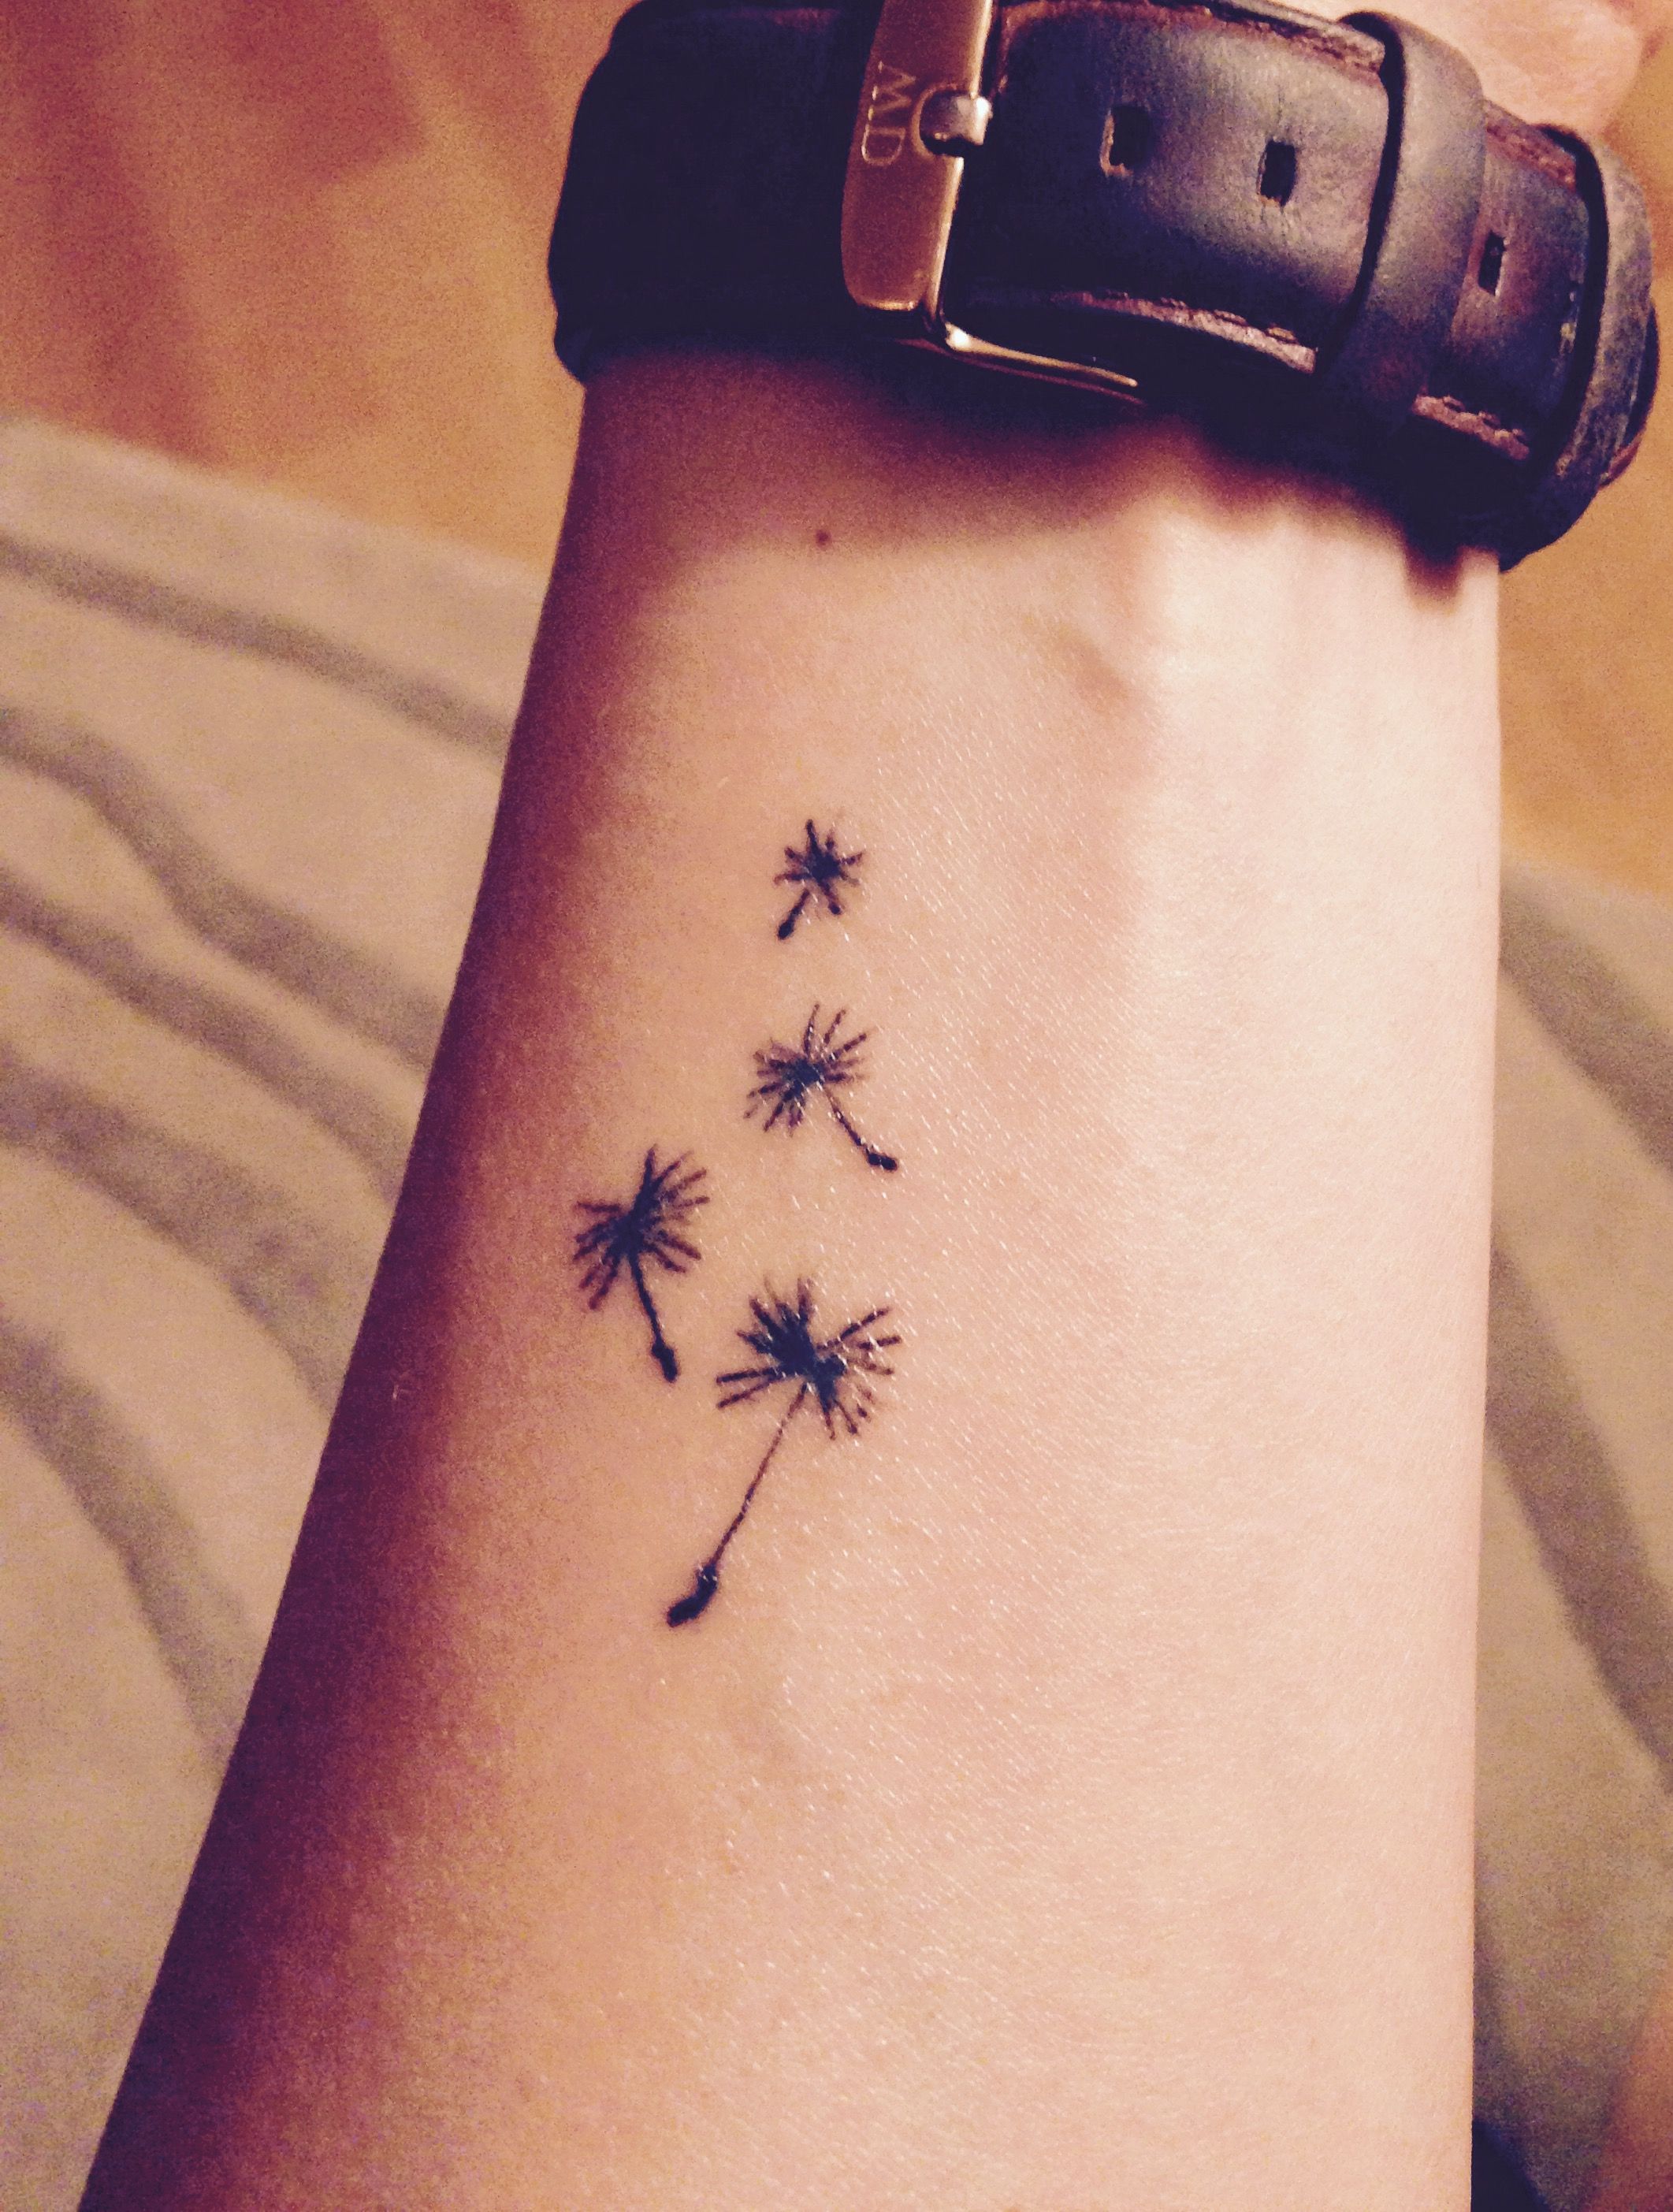 Dandelion tattoo, little seeds flying out of the white puff